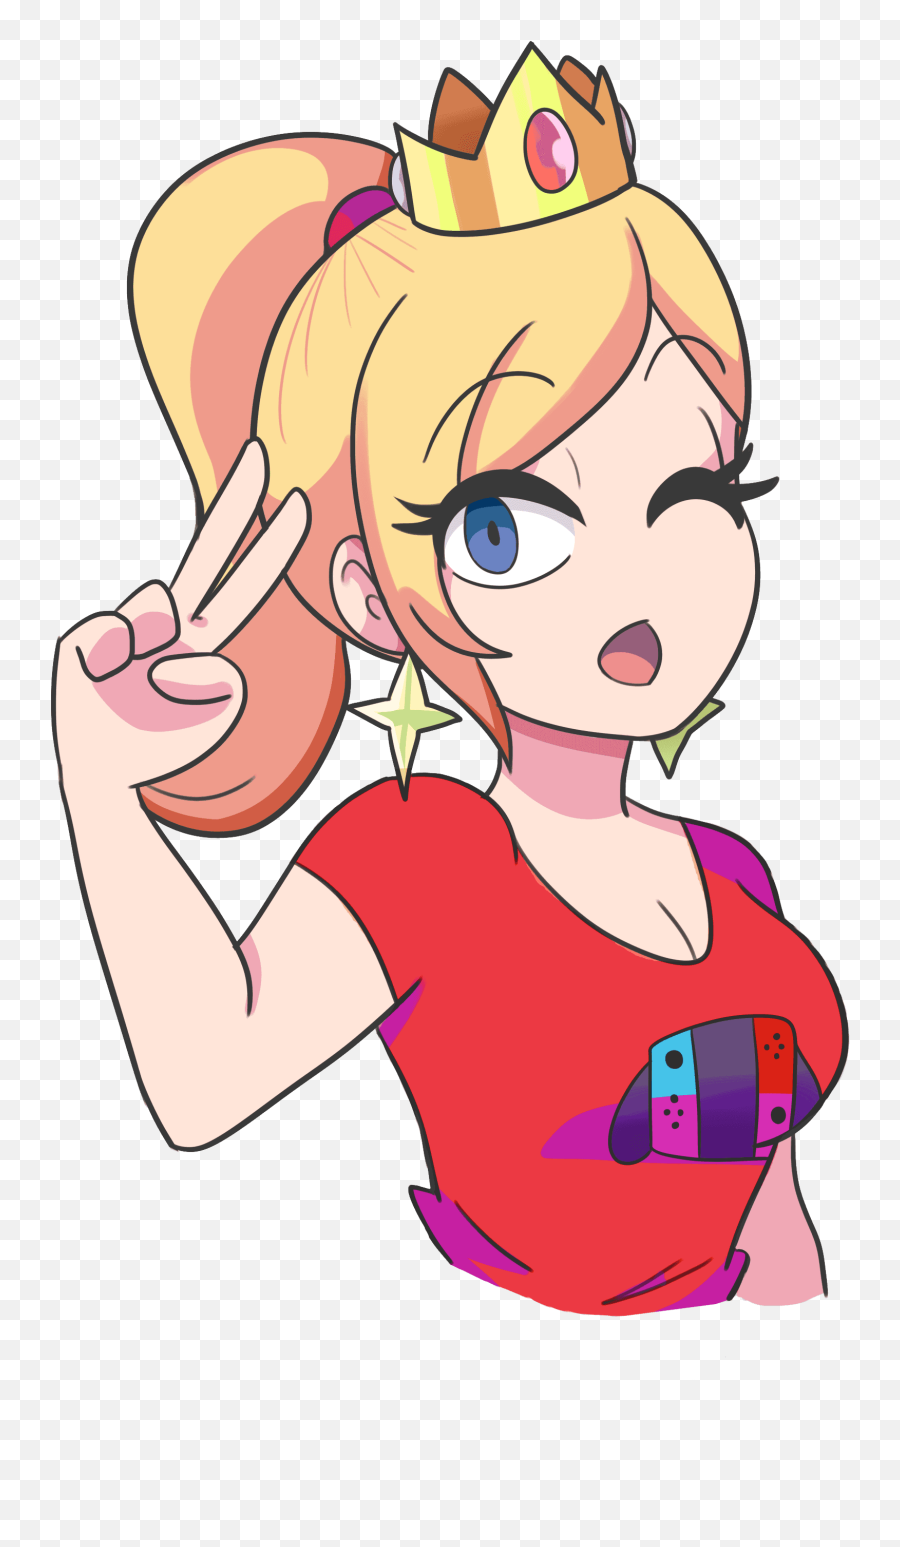 1upgirlxaltis Details - Fictional Character Png,Princess Peach Icon